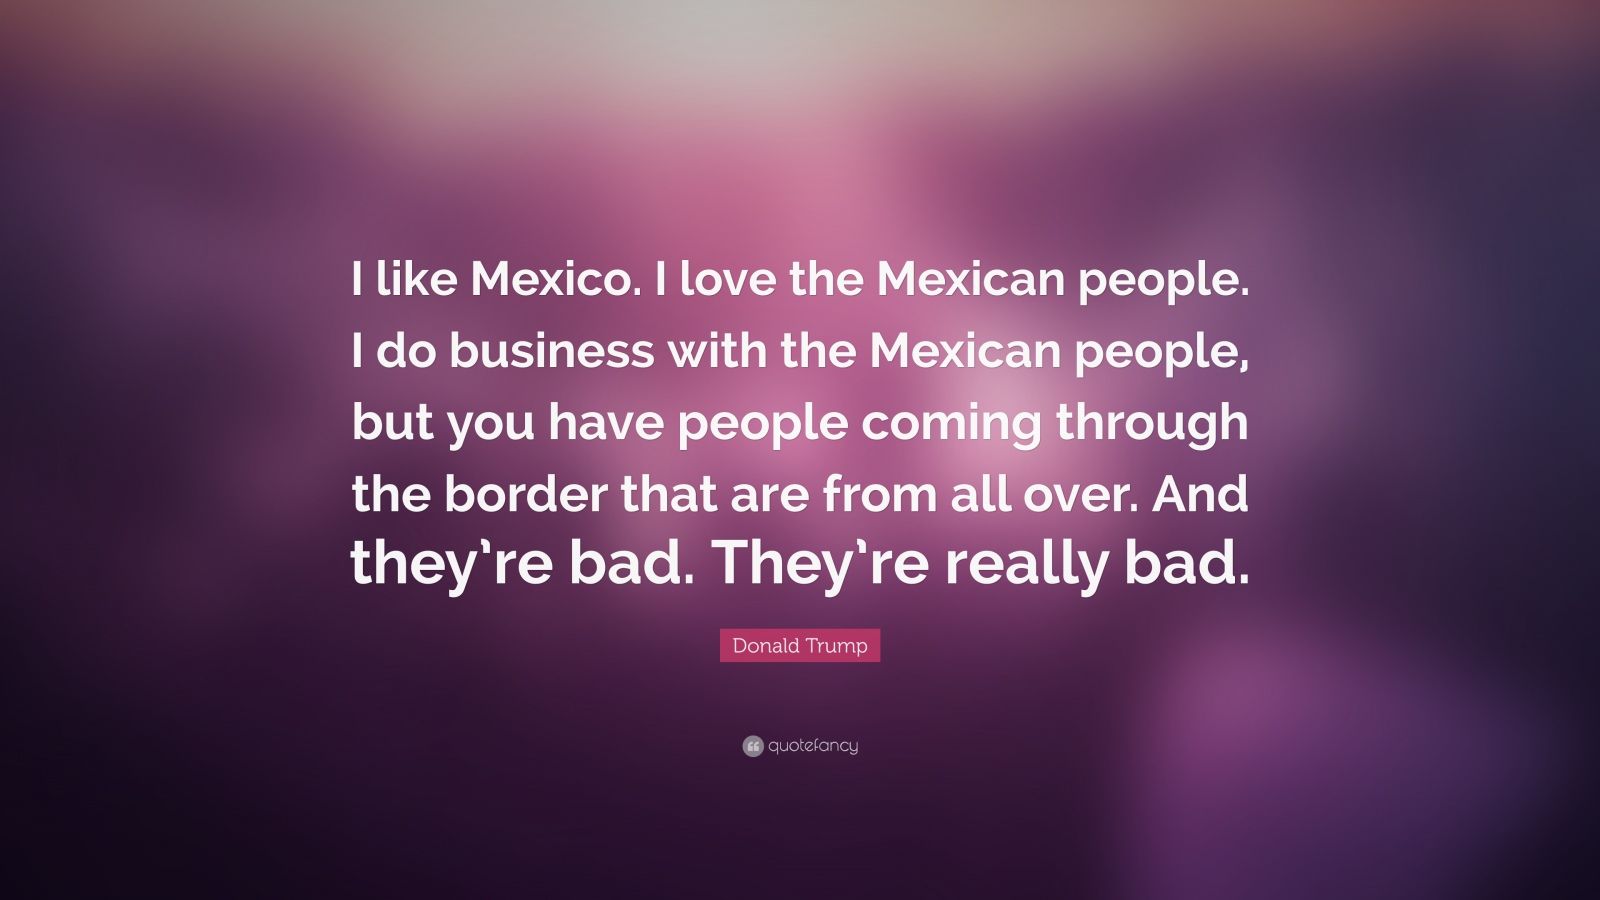 Donald Trump Quote: “I like Mexico. I love the Mexican people. I do